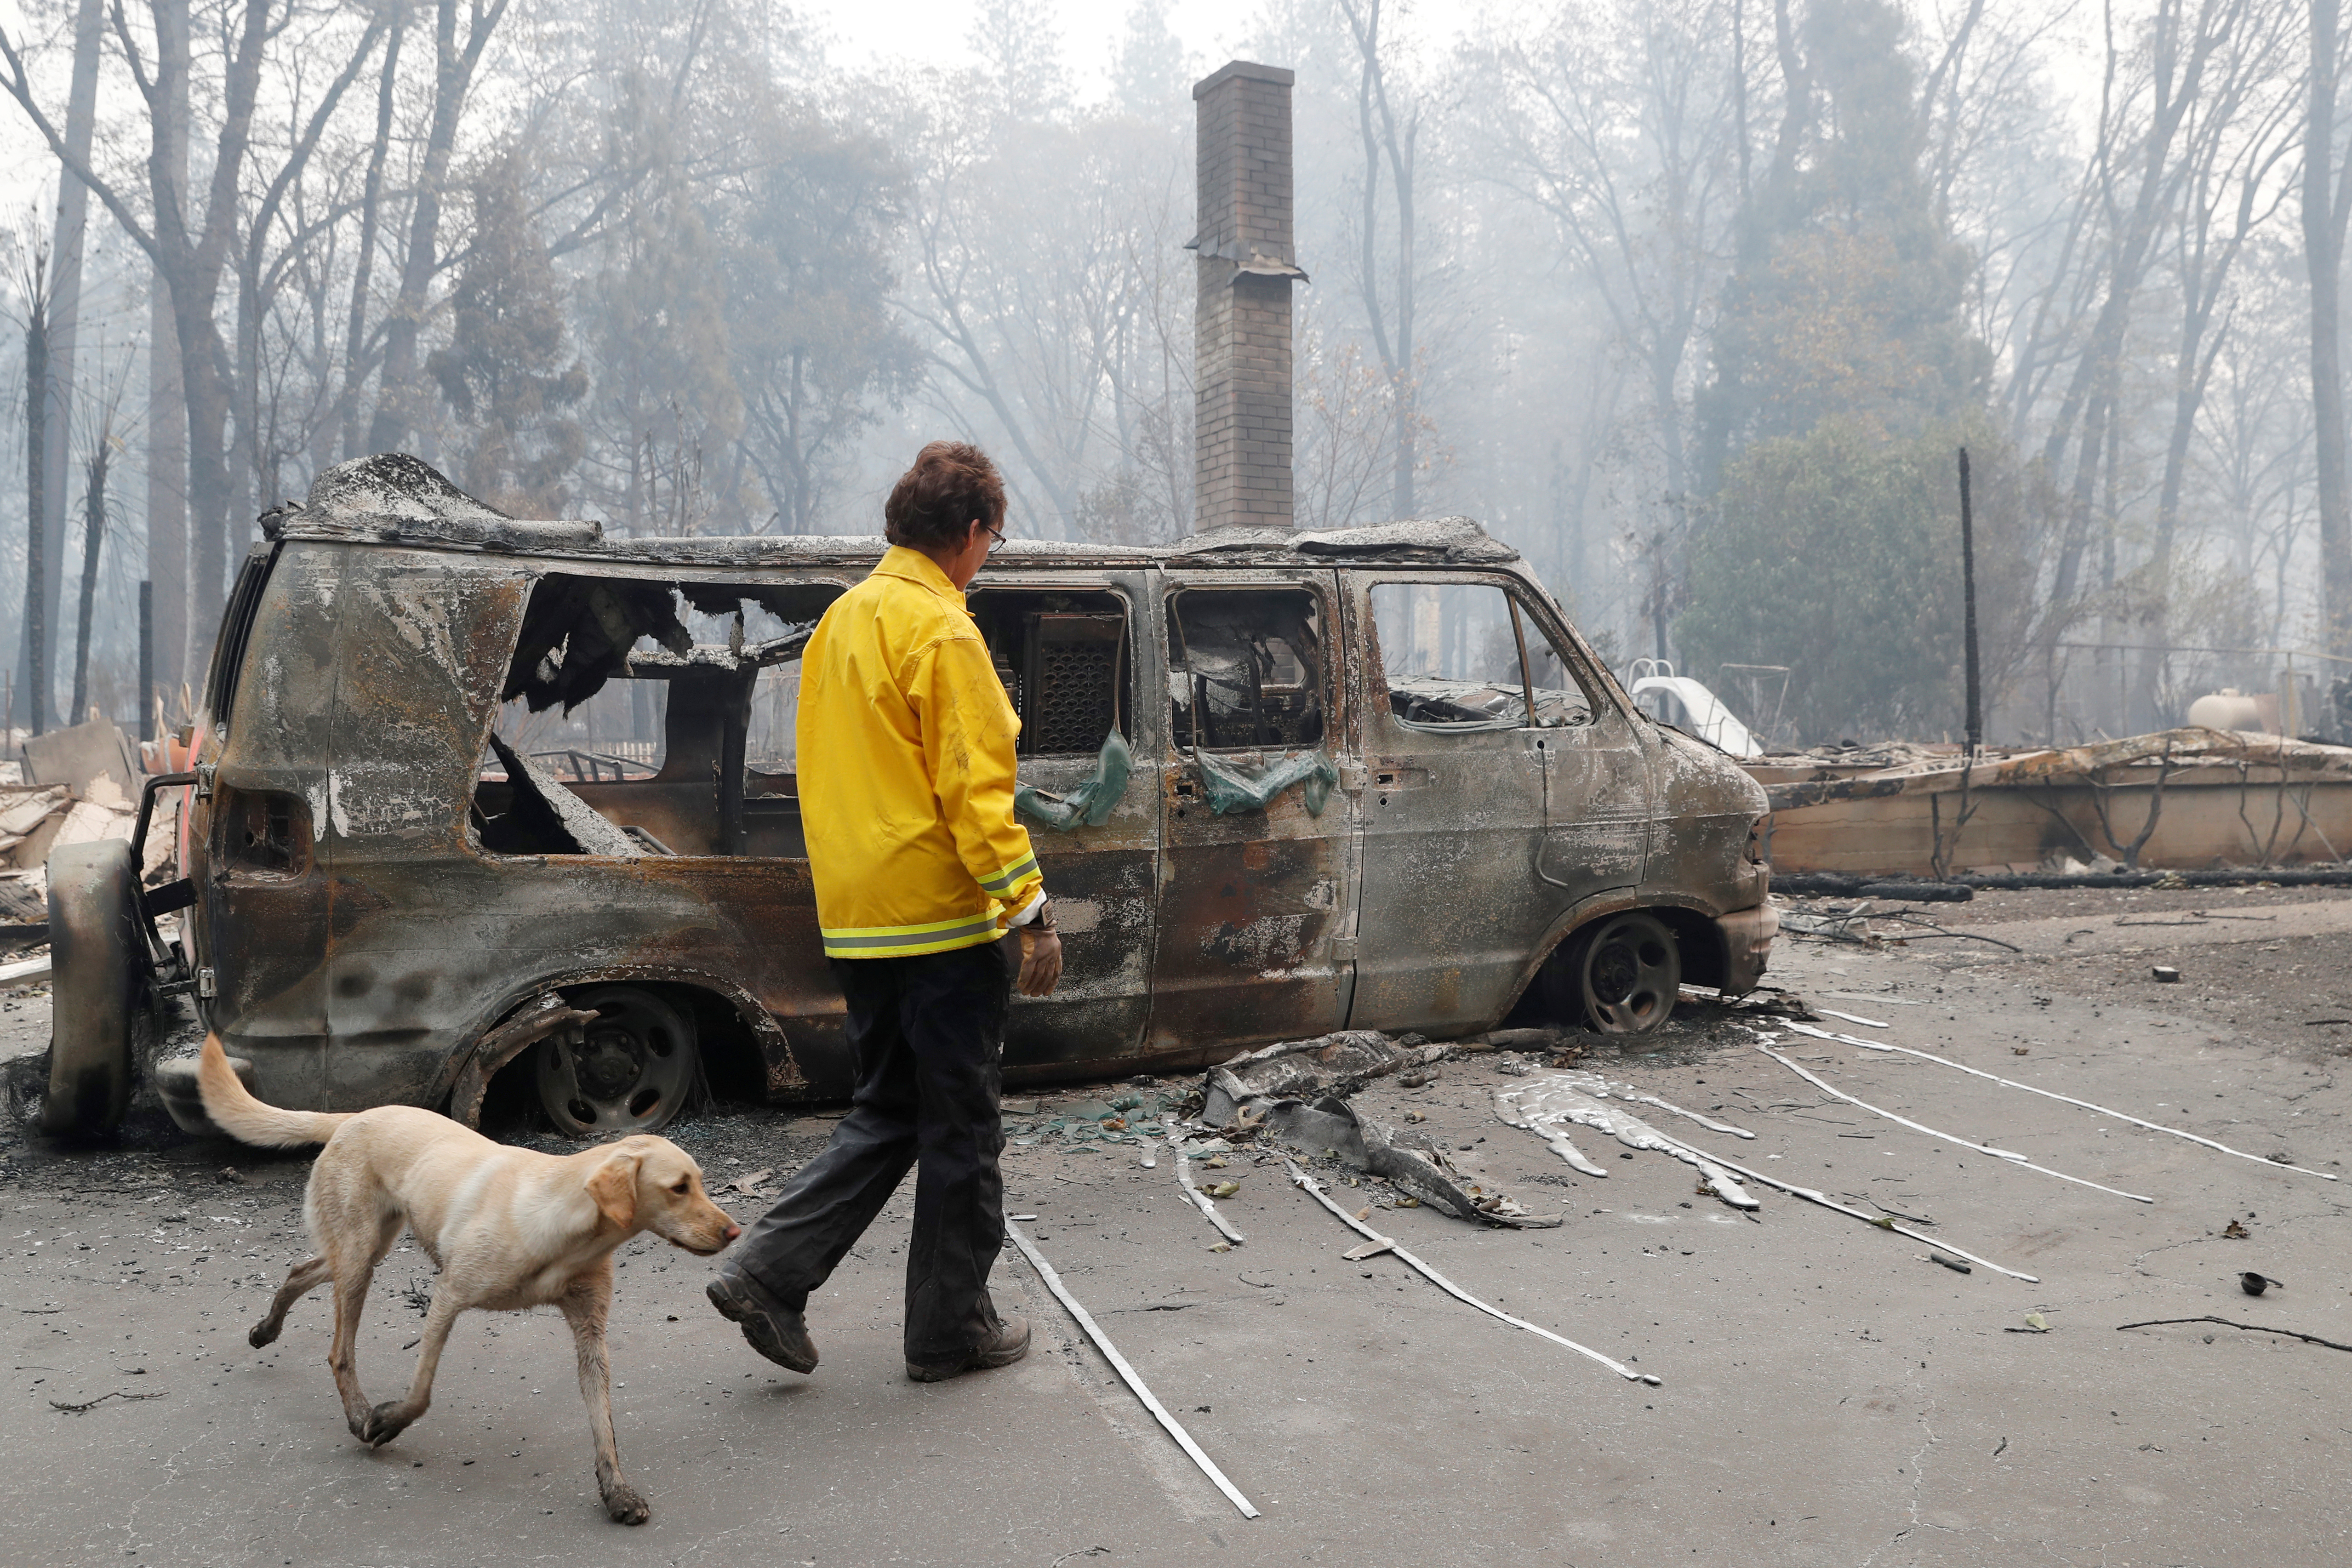 Karen Atkinson, of Marin, searches for human remains with her cadaver dog, Echo, in a neighborhood destroyed by the Camp Fire in Paradise, California, U.S., November 14, 2018. REUTERS/Terray Sylvester